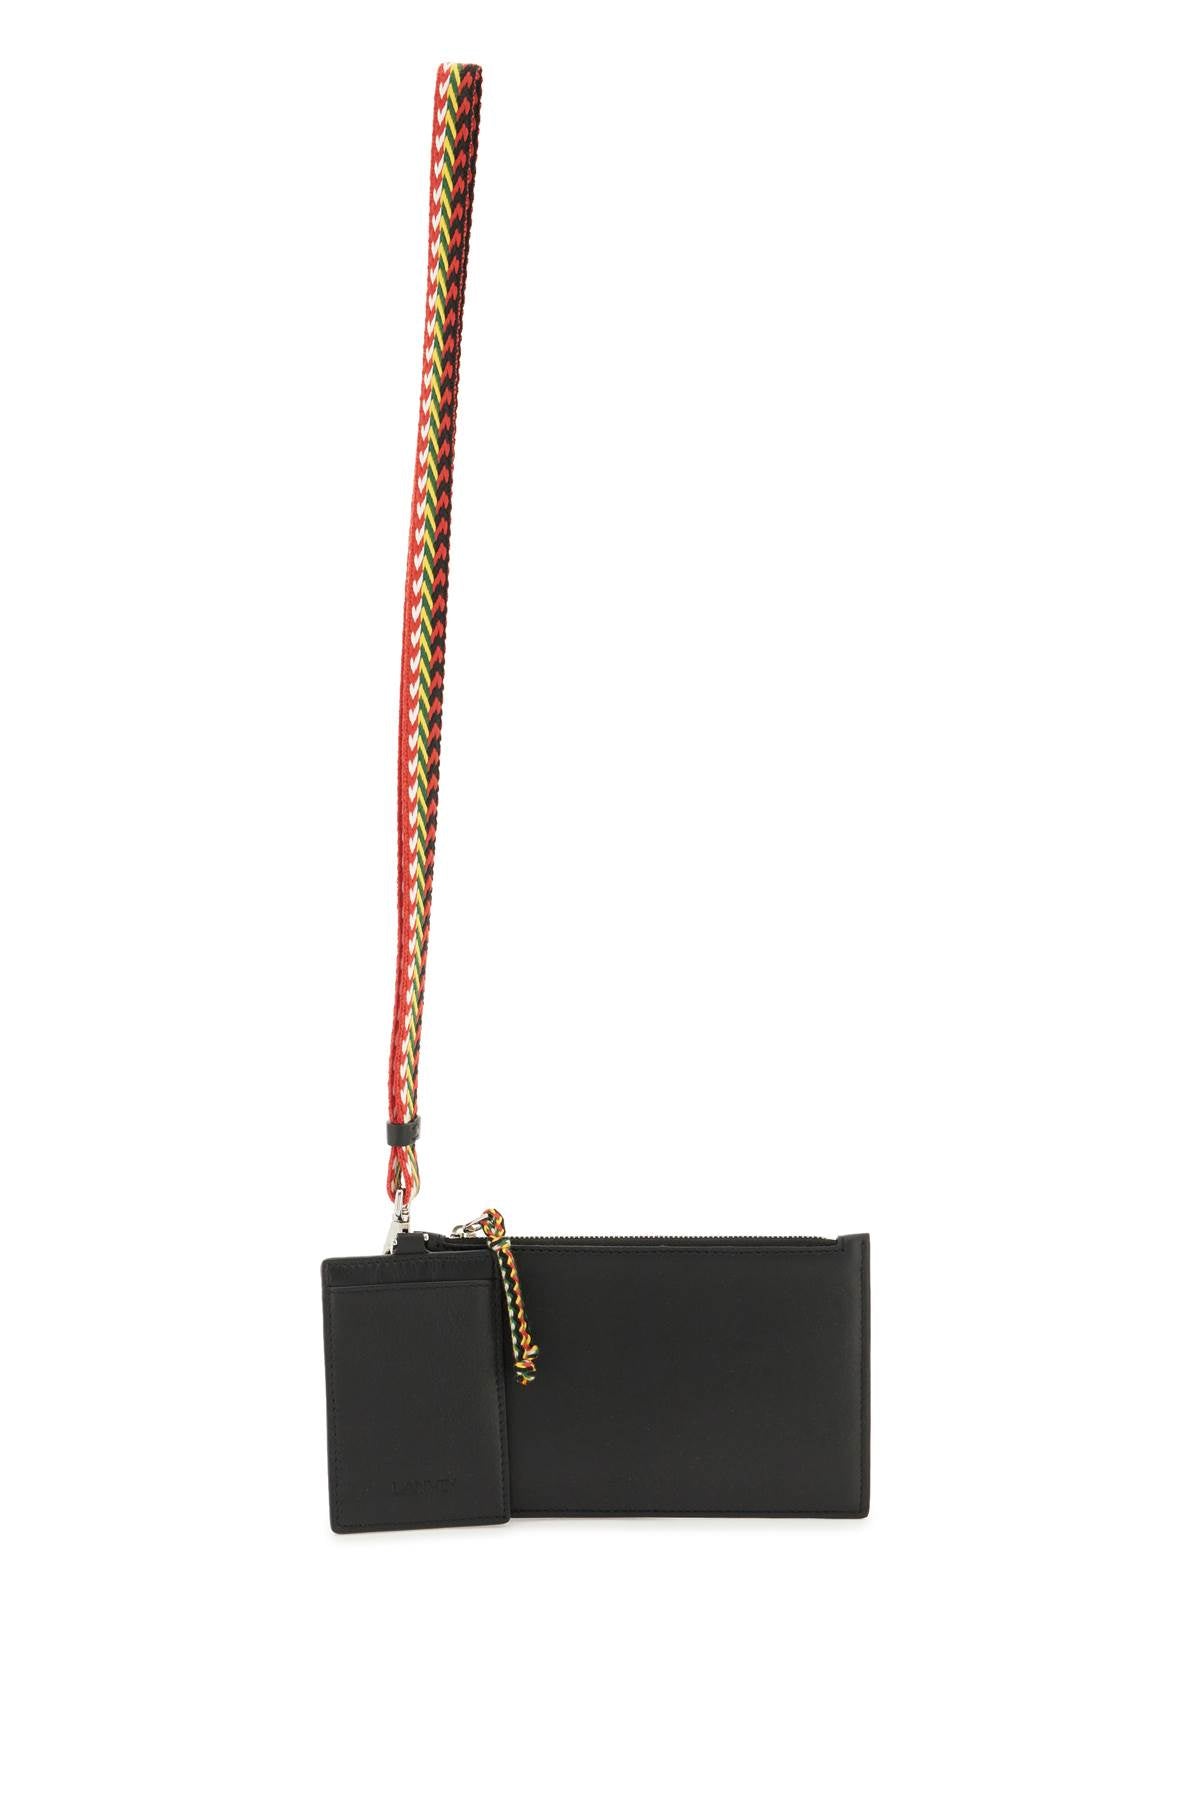 Lanvin double pouch with strap-0